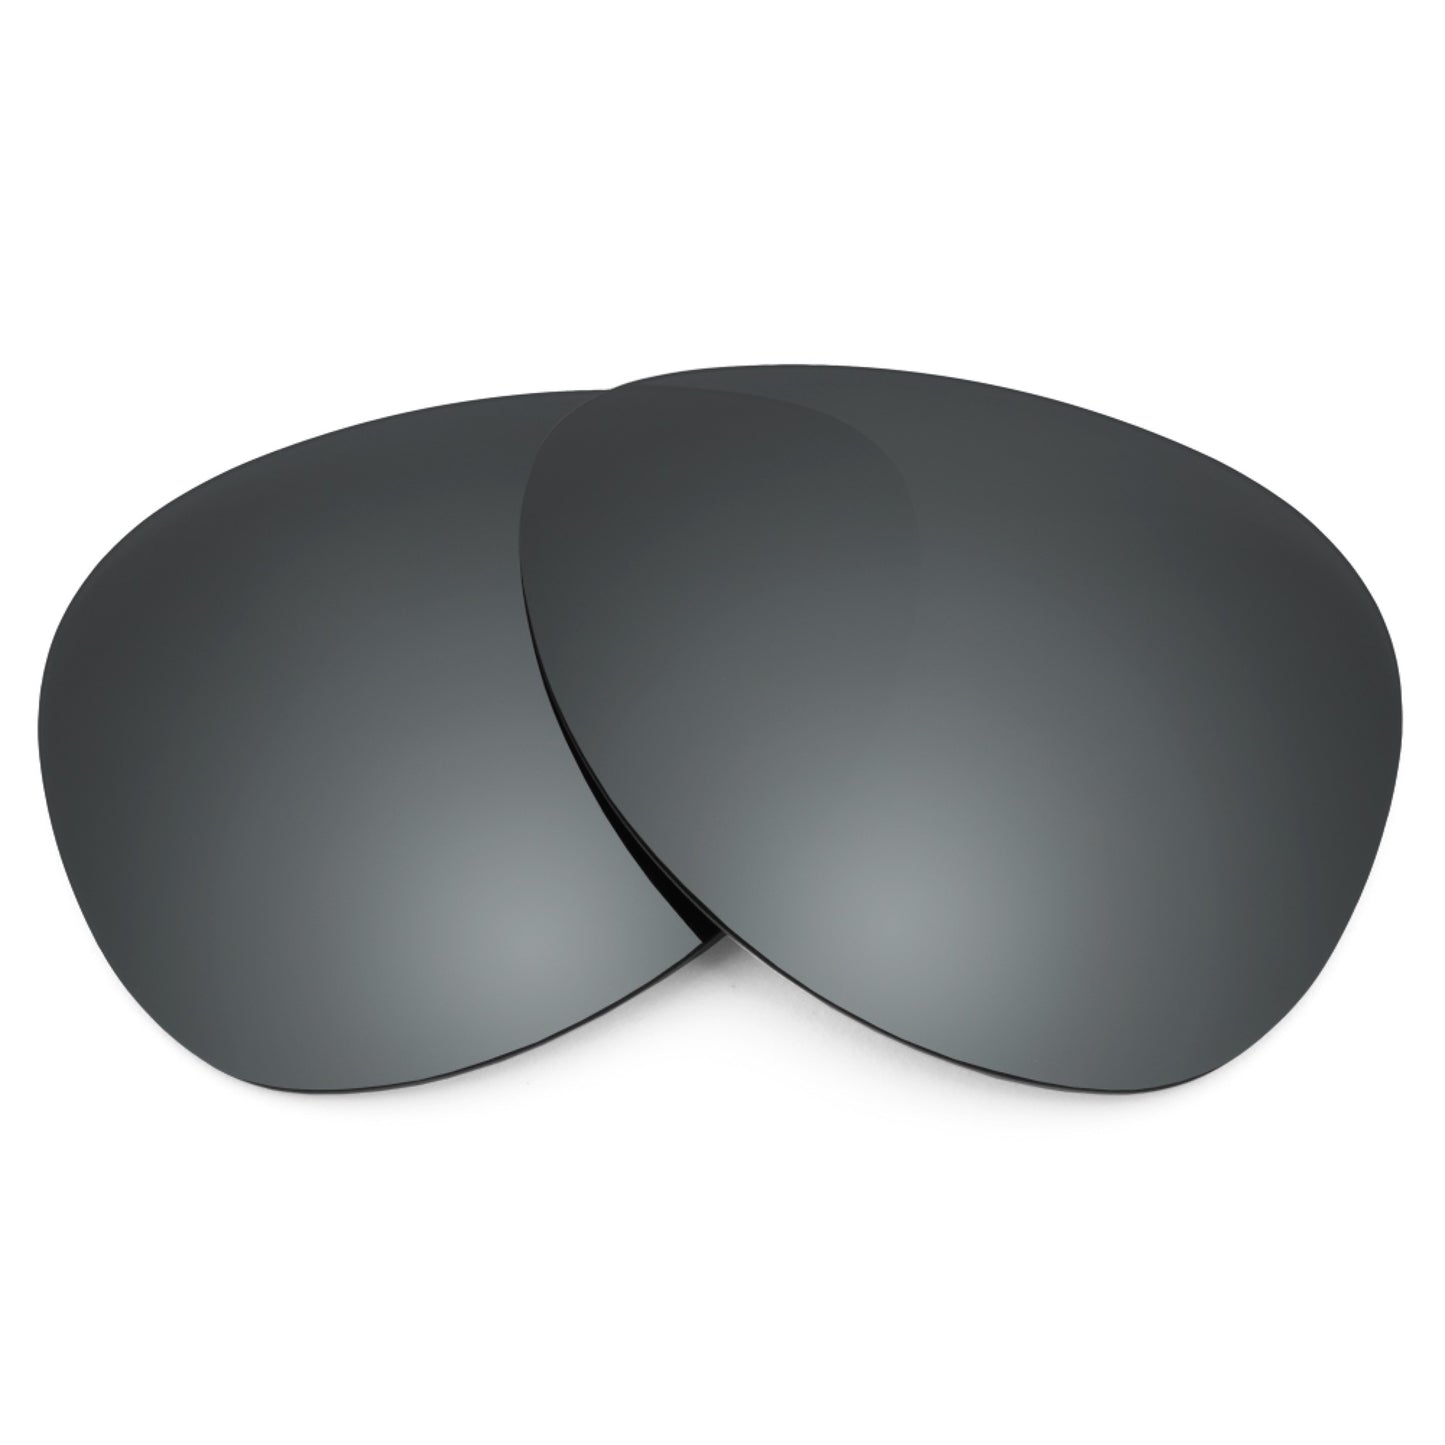 Revant replacement lenses for Ray-Ban RB8301 56mm Non-Polarized Black Chrome